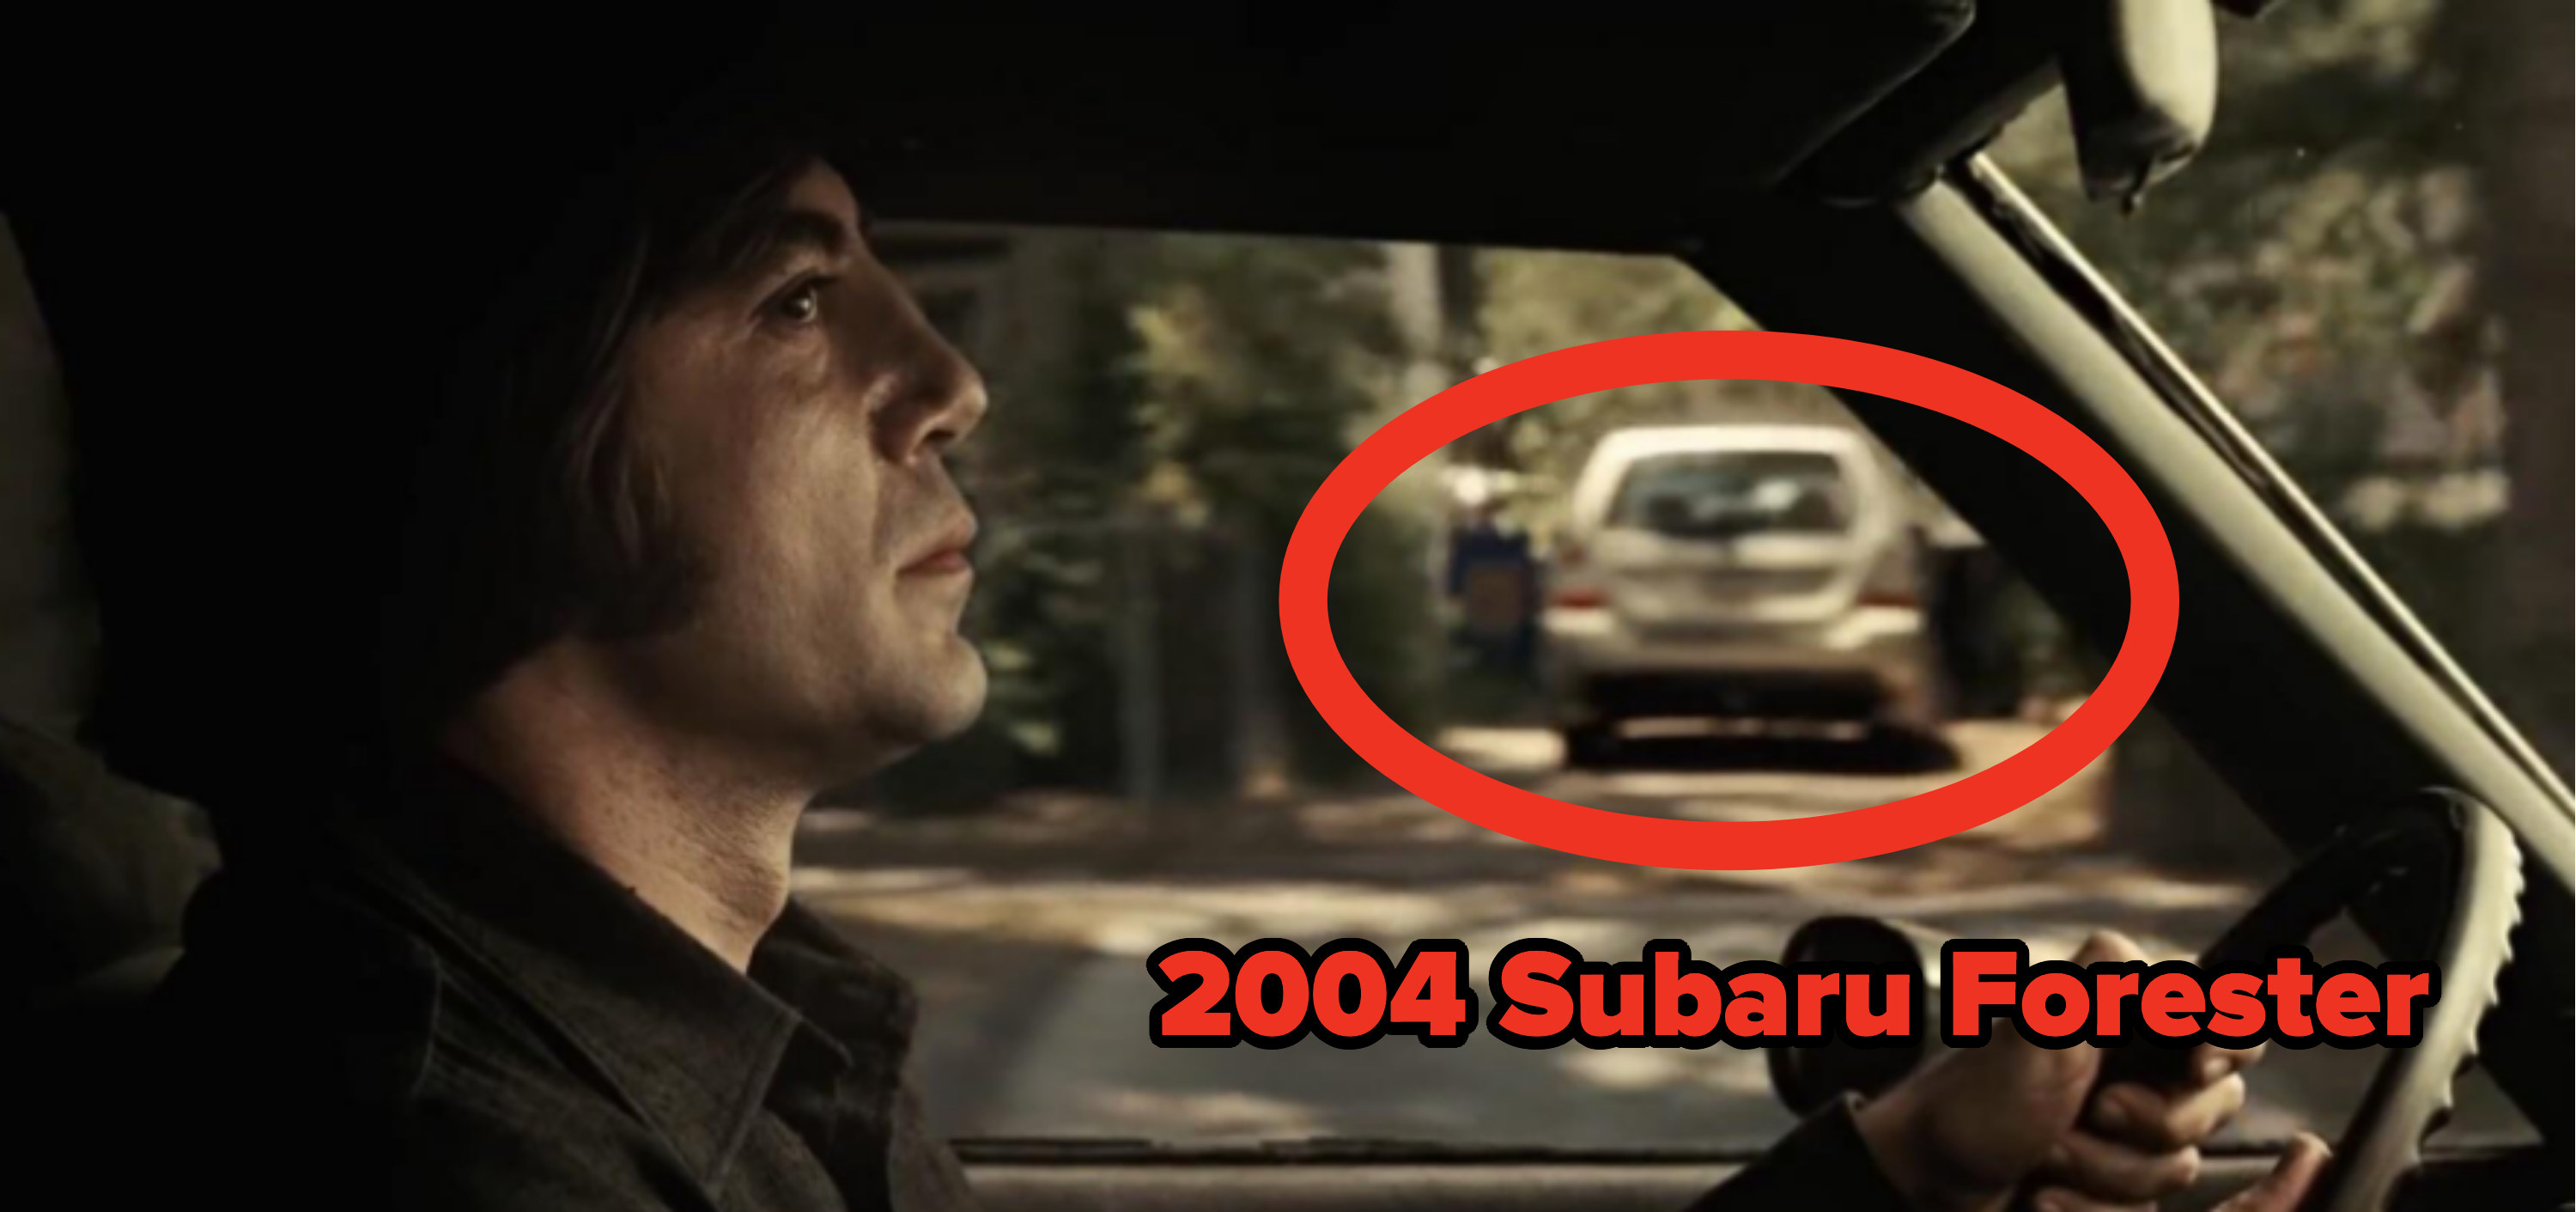 The car in the background is from 2004